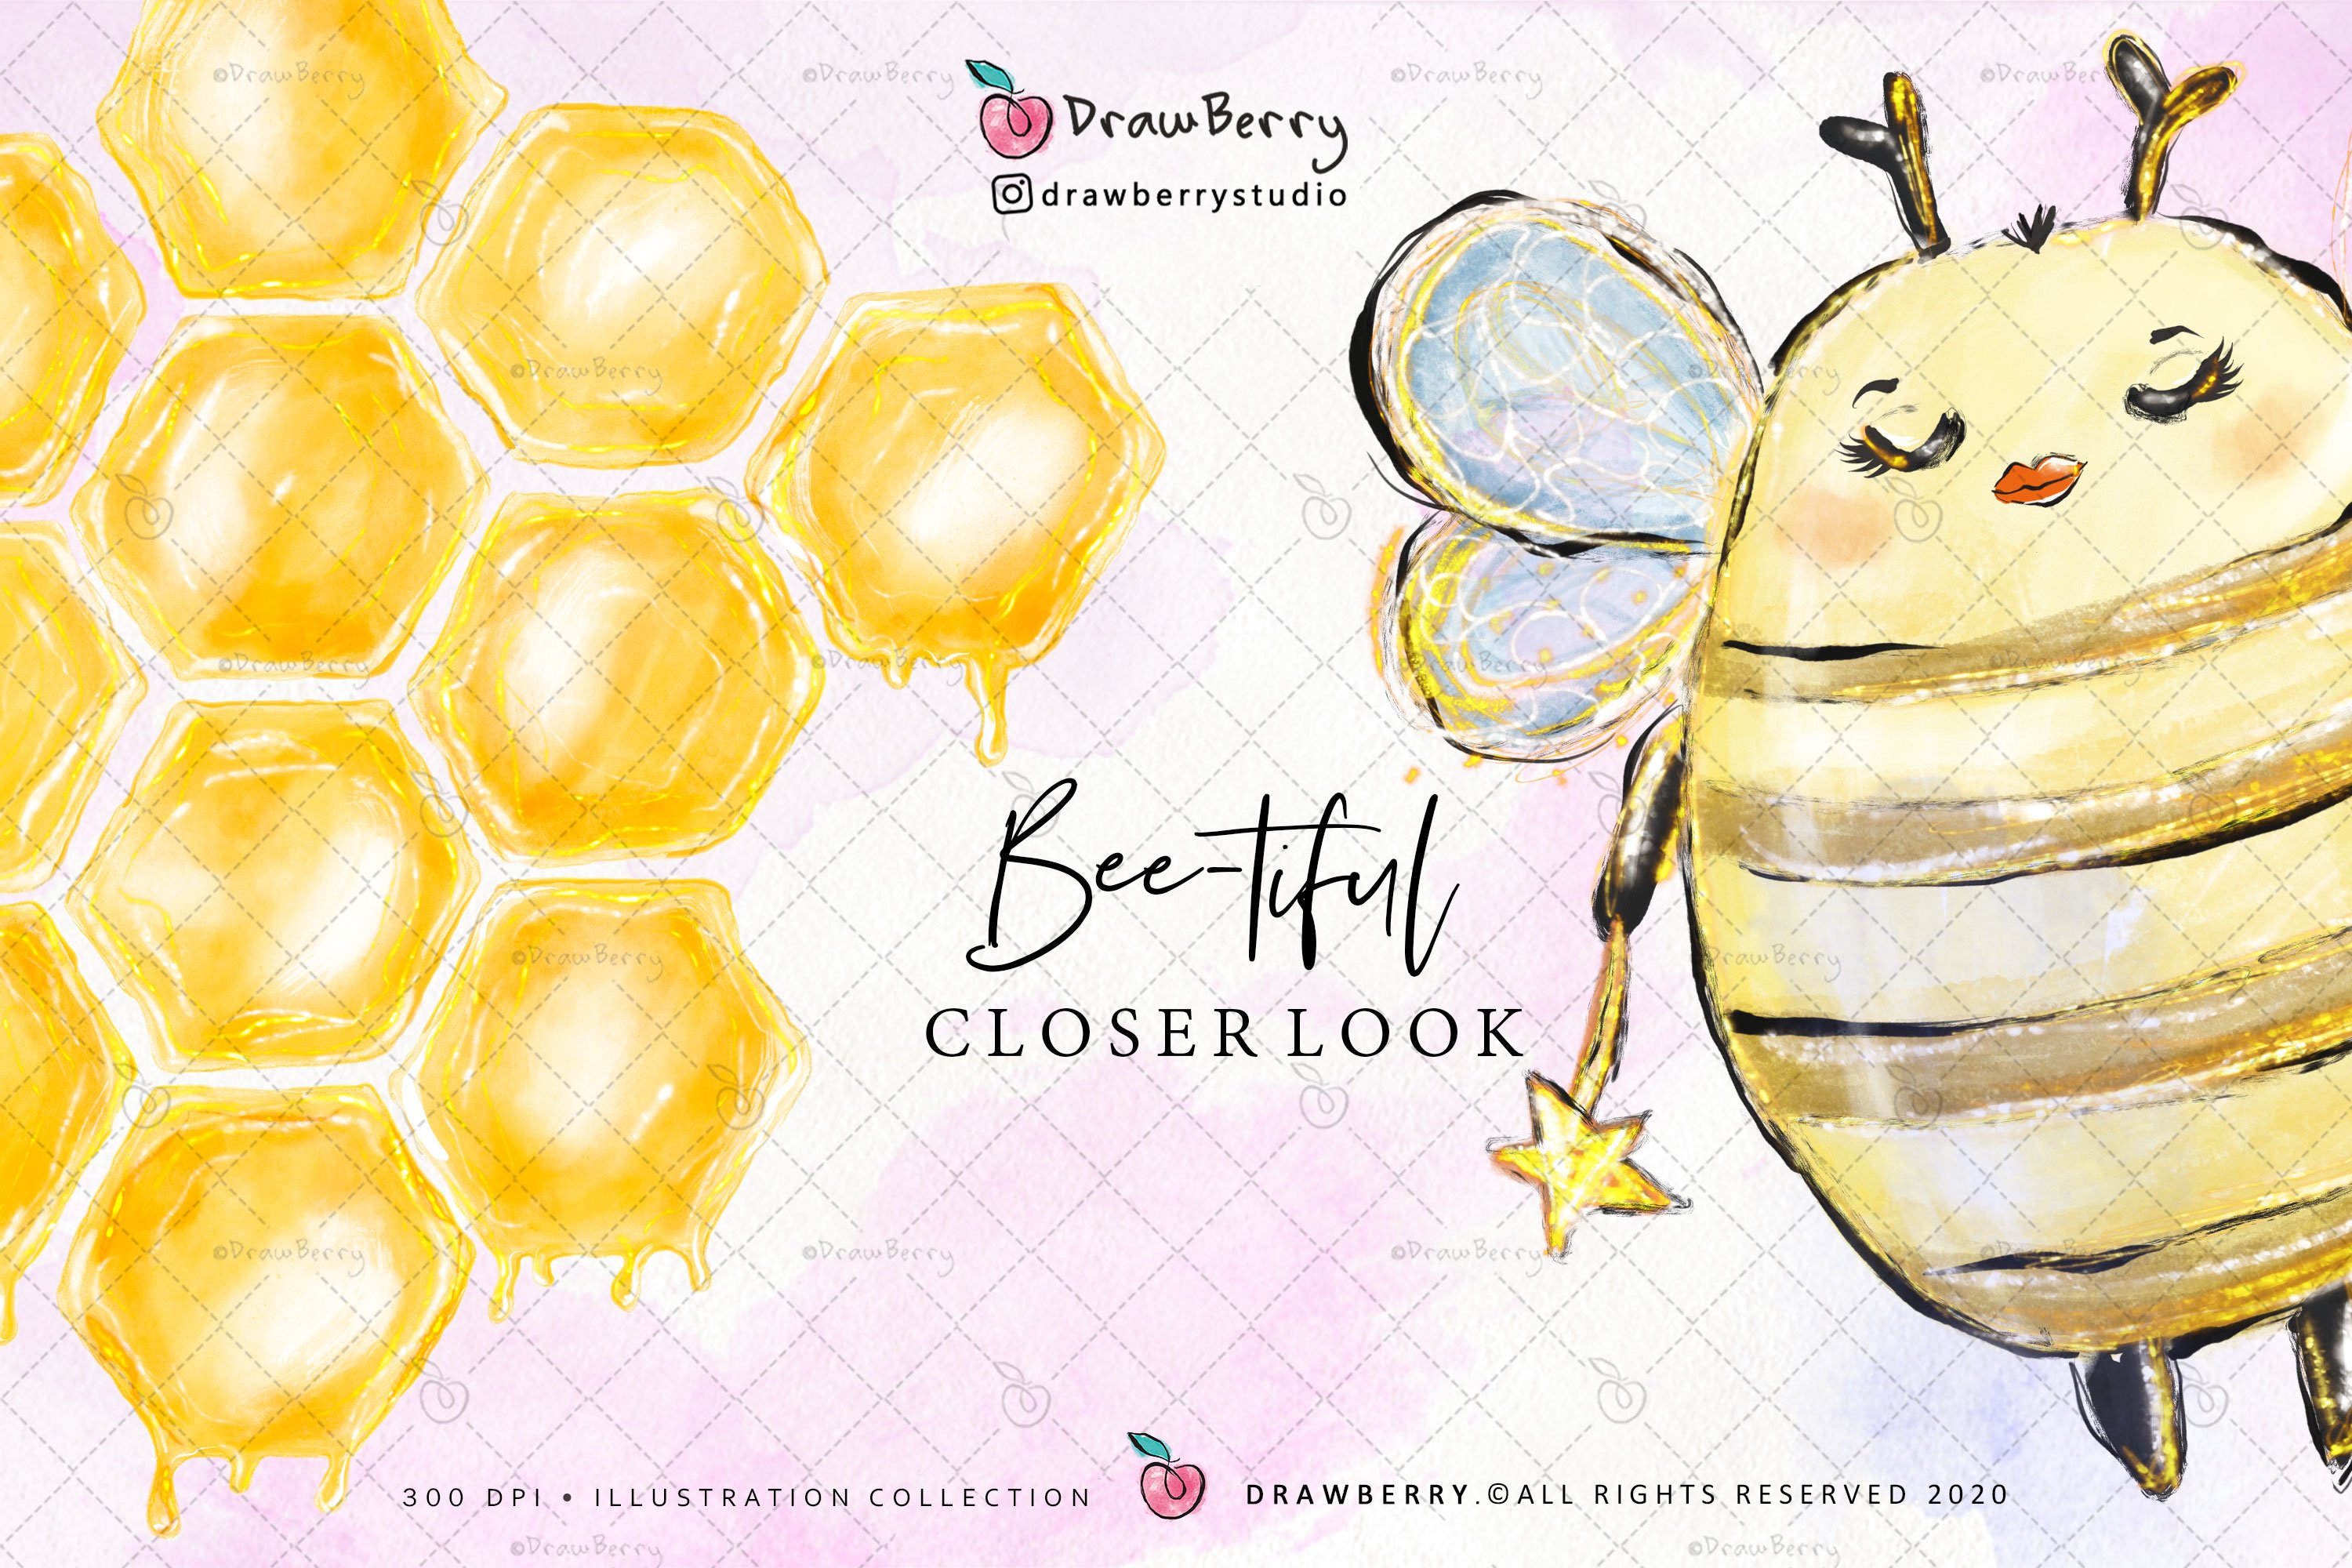 beetiful clipart drawberry 4 525